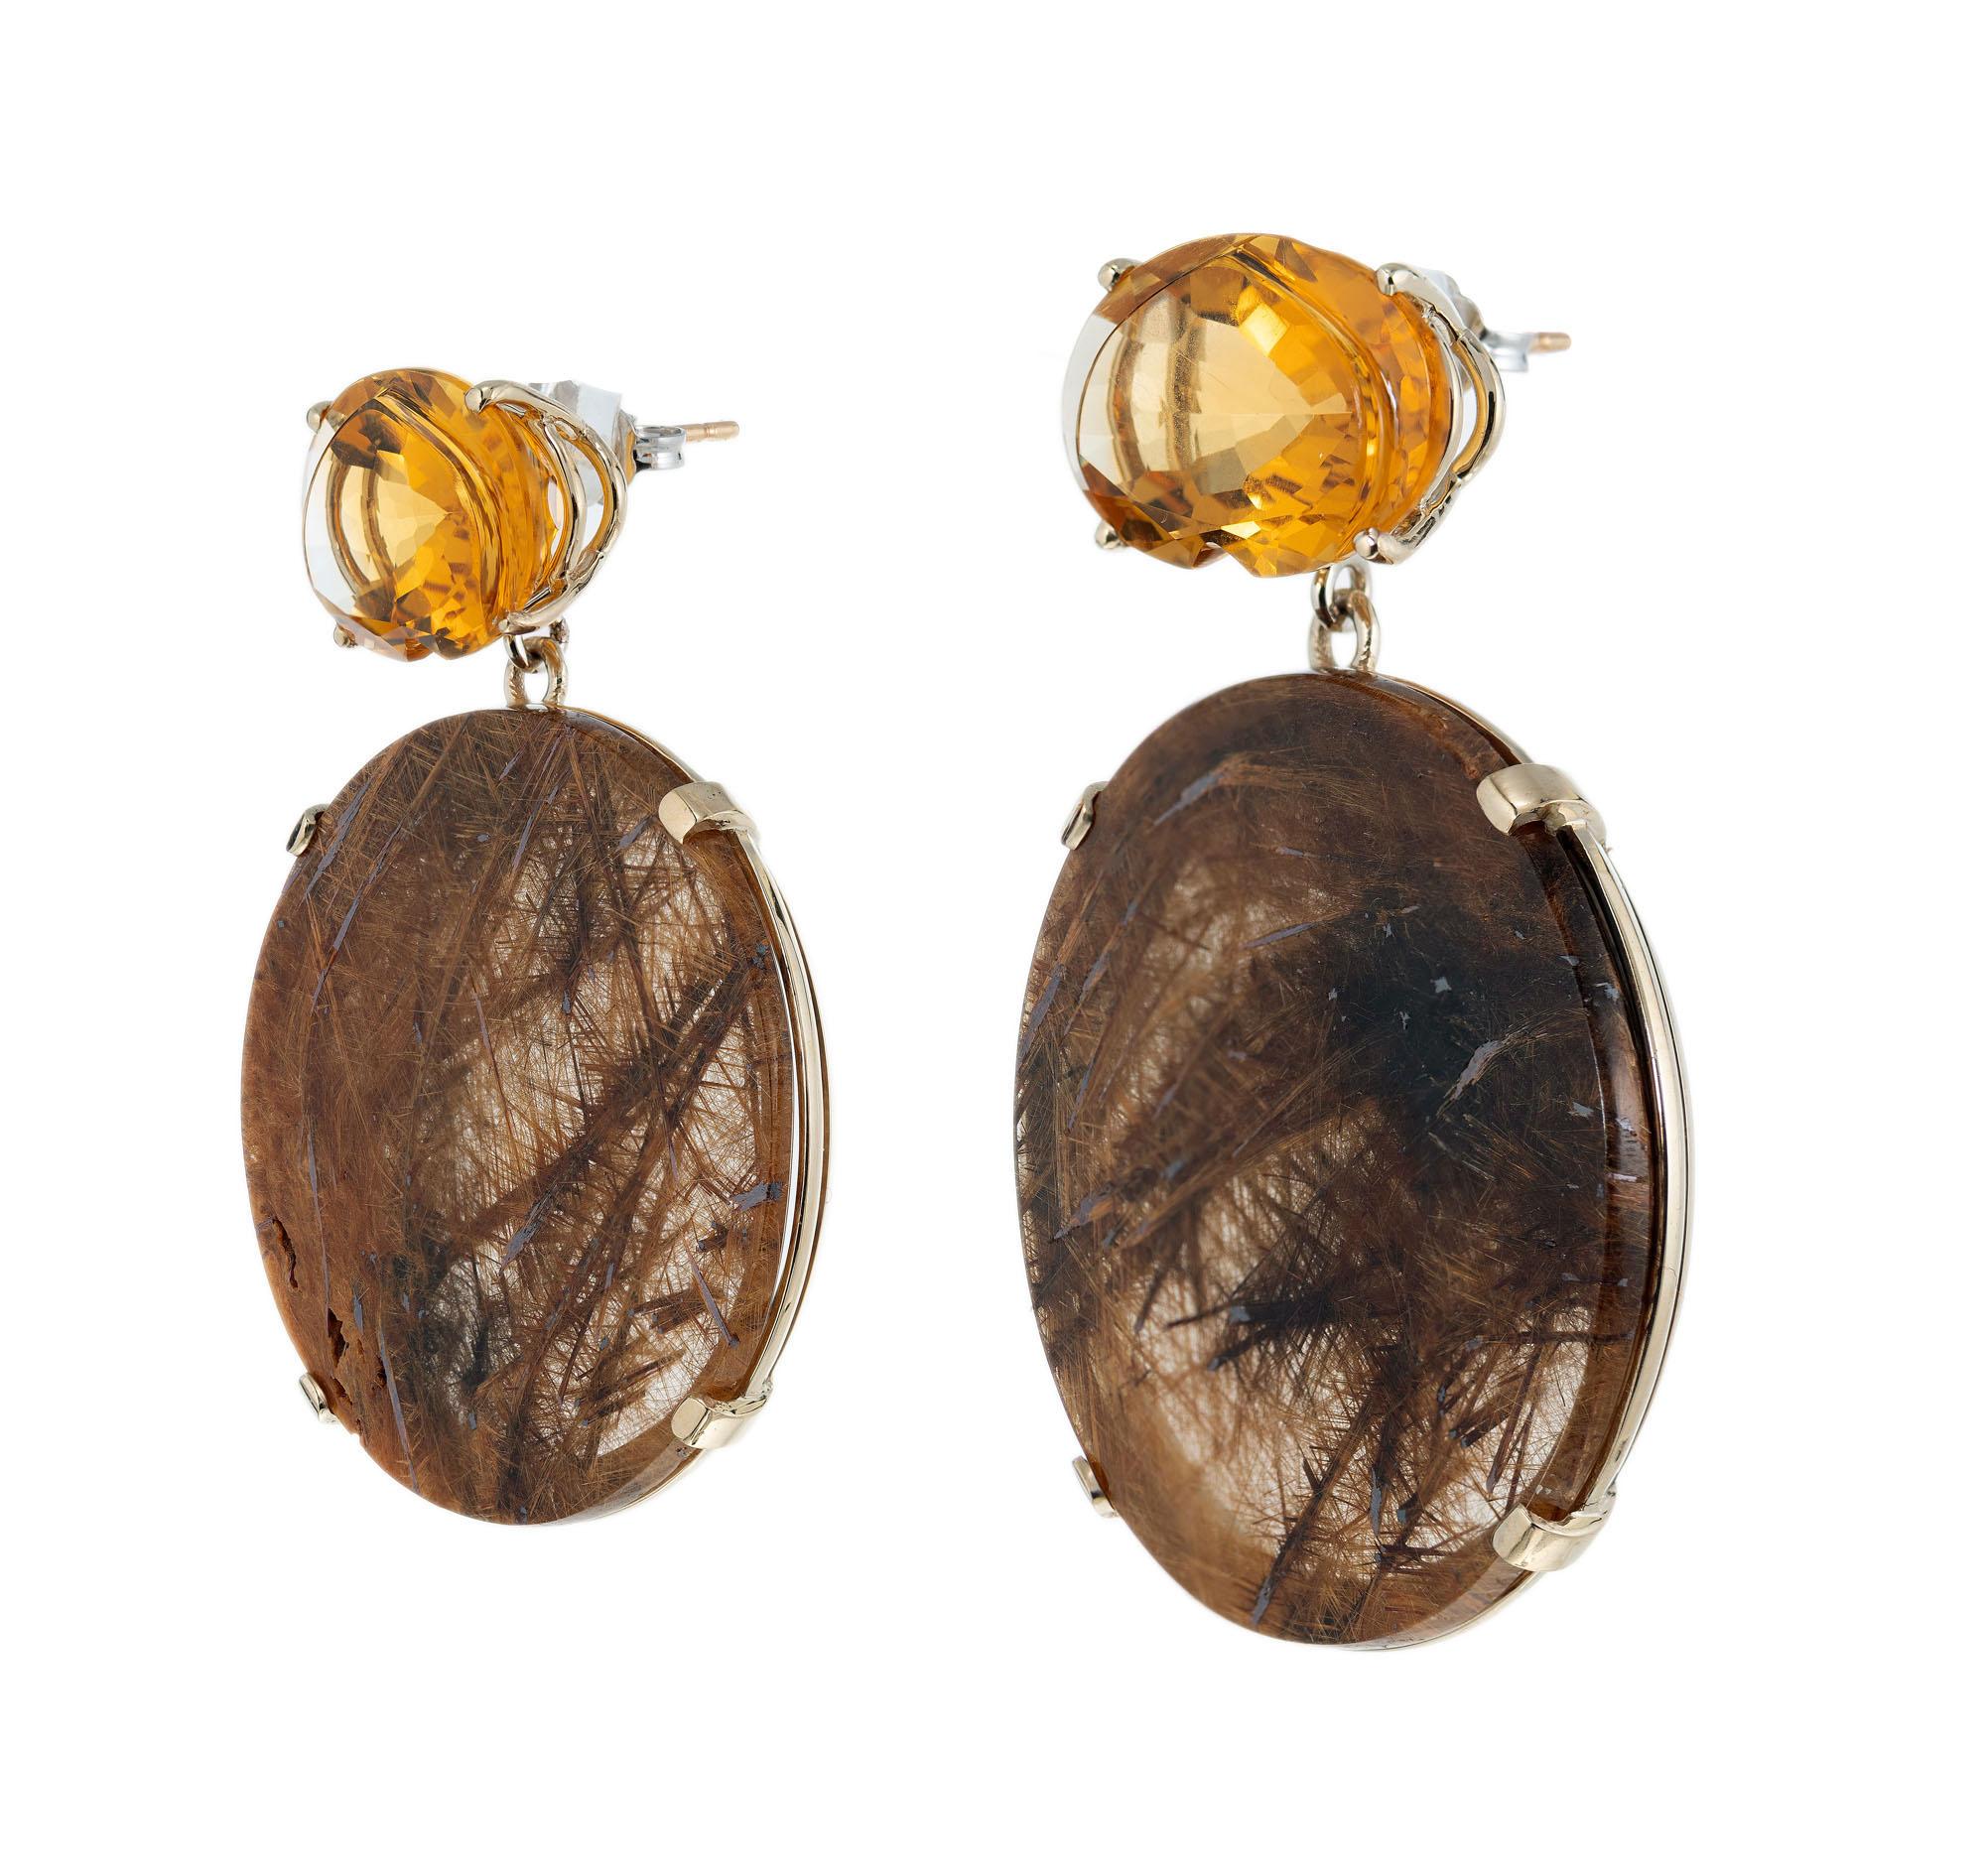 Natural Quartz and citrine large dangle earrings. Set in 14k yellow gold, created in the Peter Suchy Workshop.

2 golden yellow fancy cut natural Citrine, approx. total weight 17.50cts, VS, 16.6 x 11mm
2 round golden yellow rutilated Quartz, natural